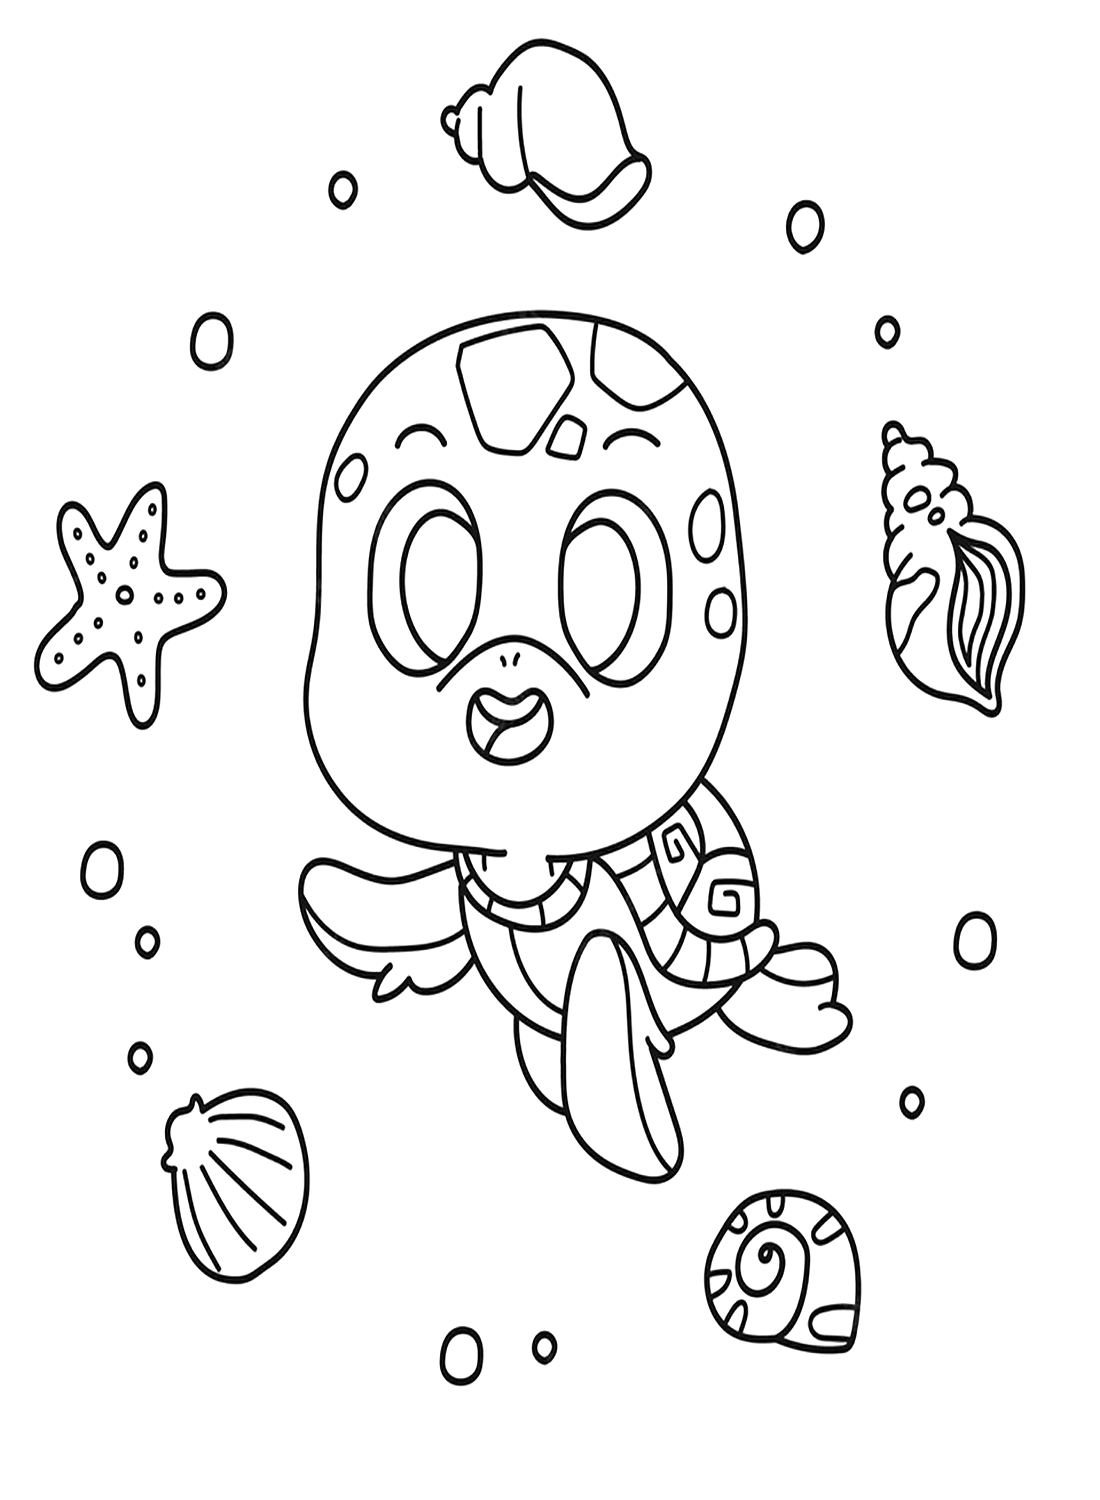 Crayola Coloring Pages Printable from Crayola